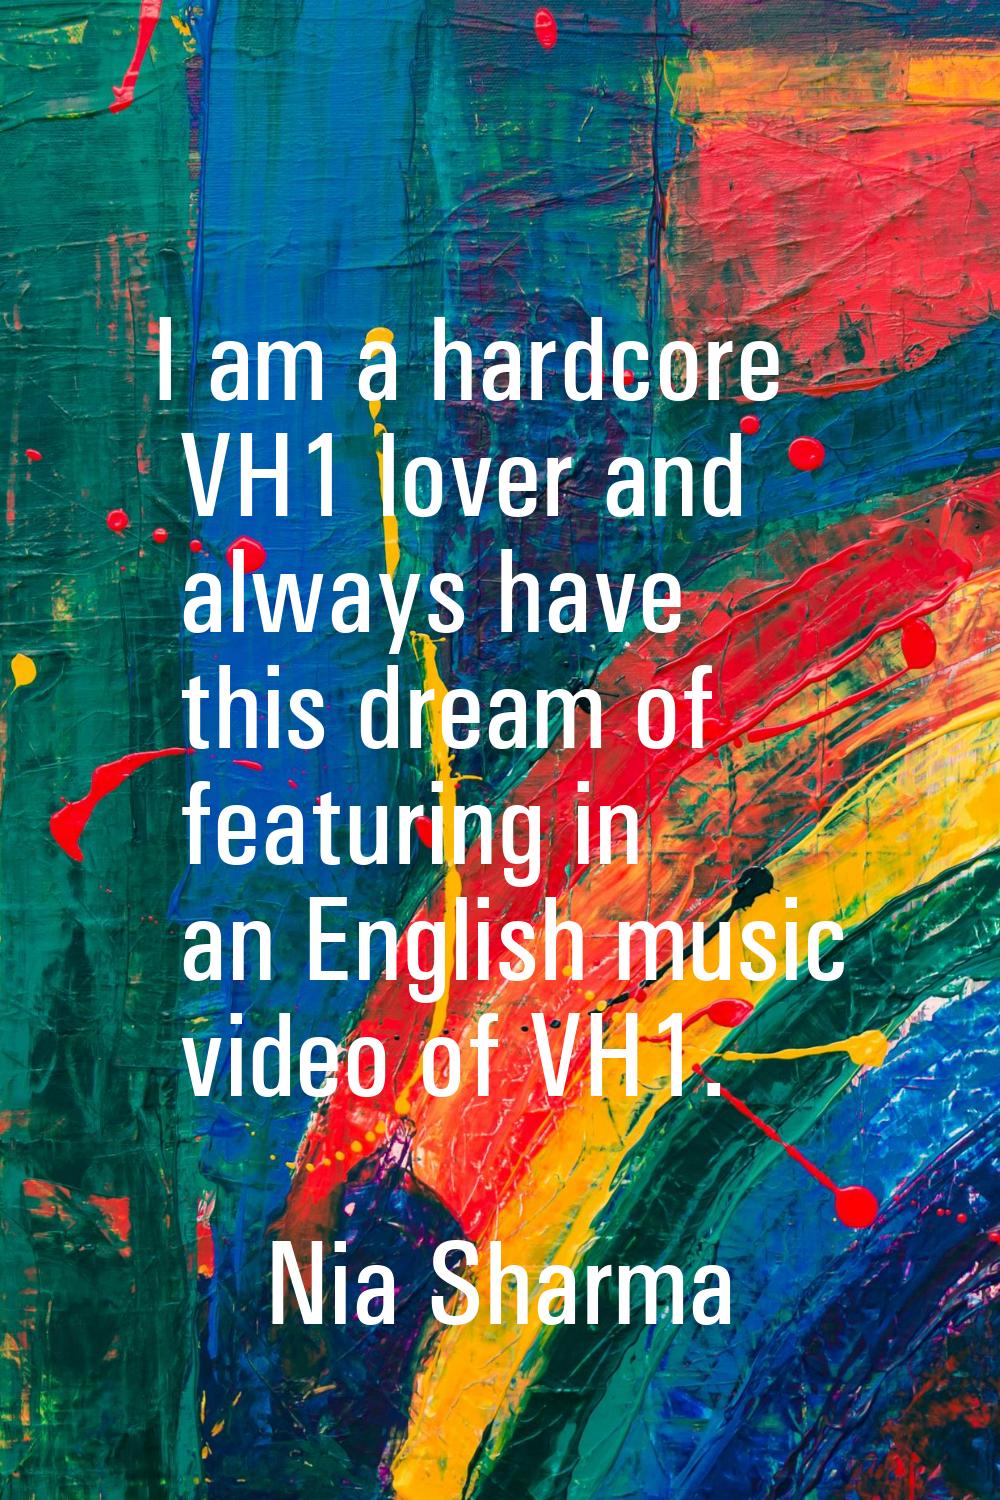 I am a hardcore VH1 lover and always have this dream of featuring in an English music video of VH1.